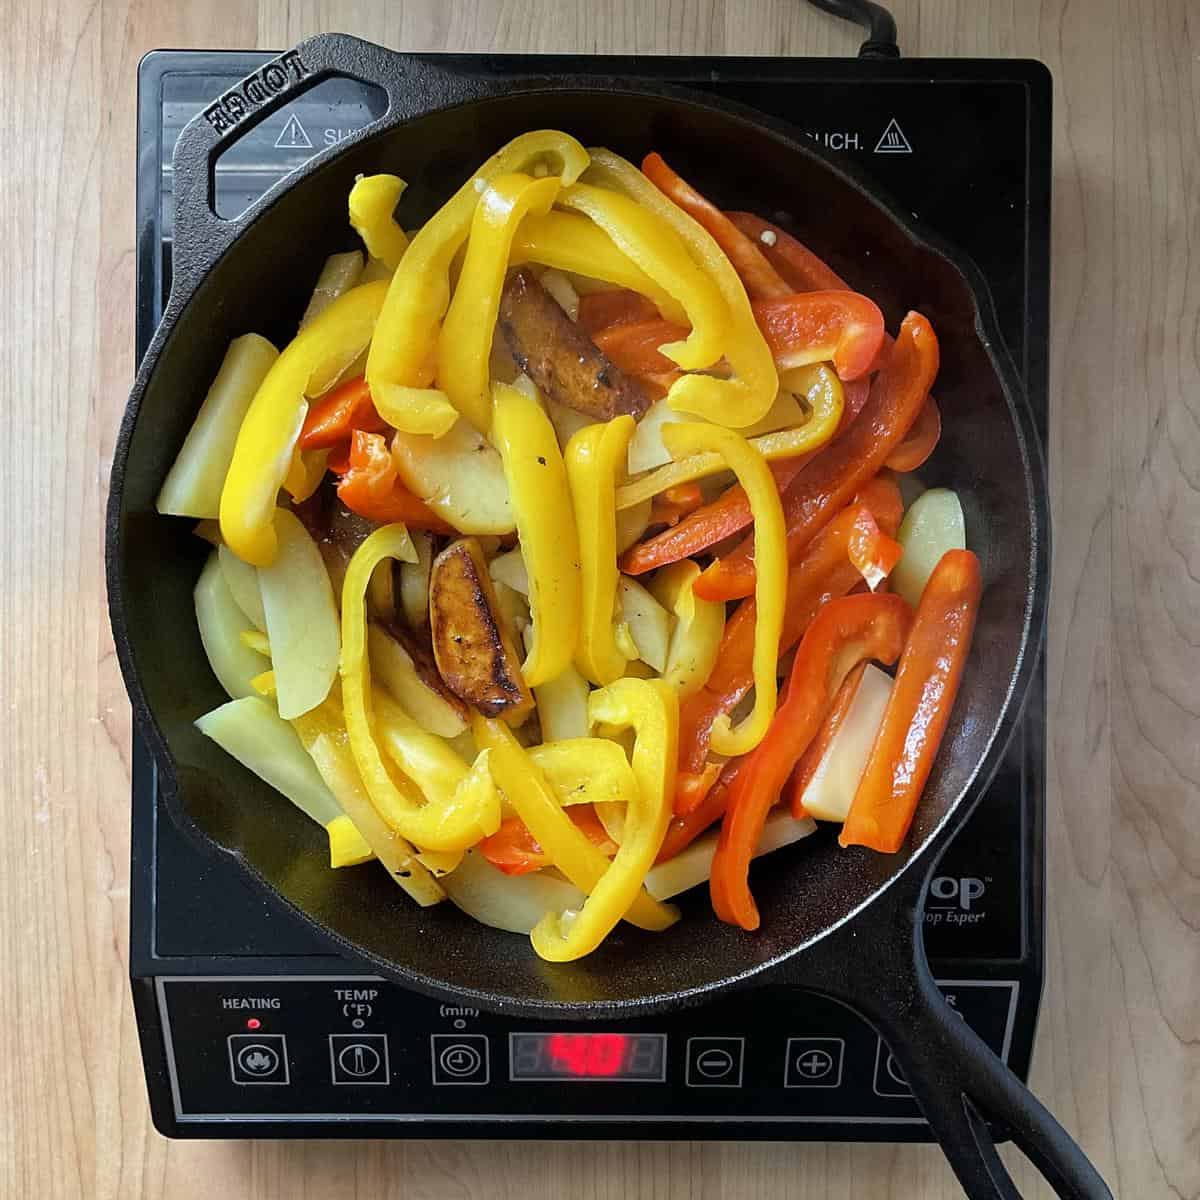 Sliced potatoes and peppers cooking in a cast iron pan.